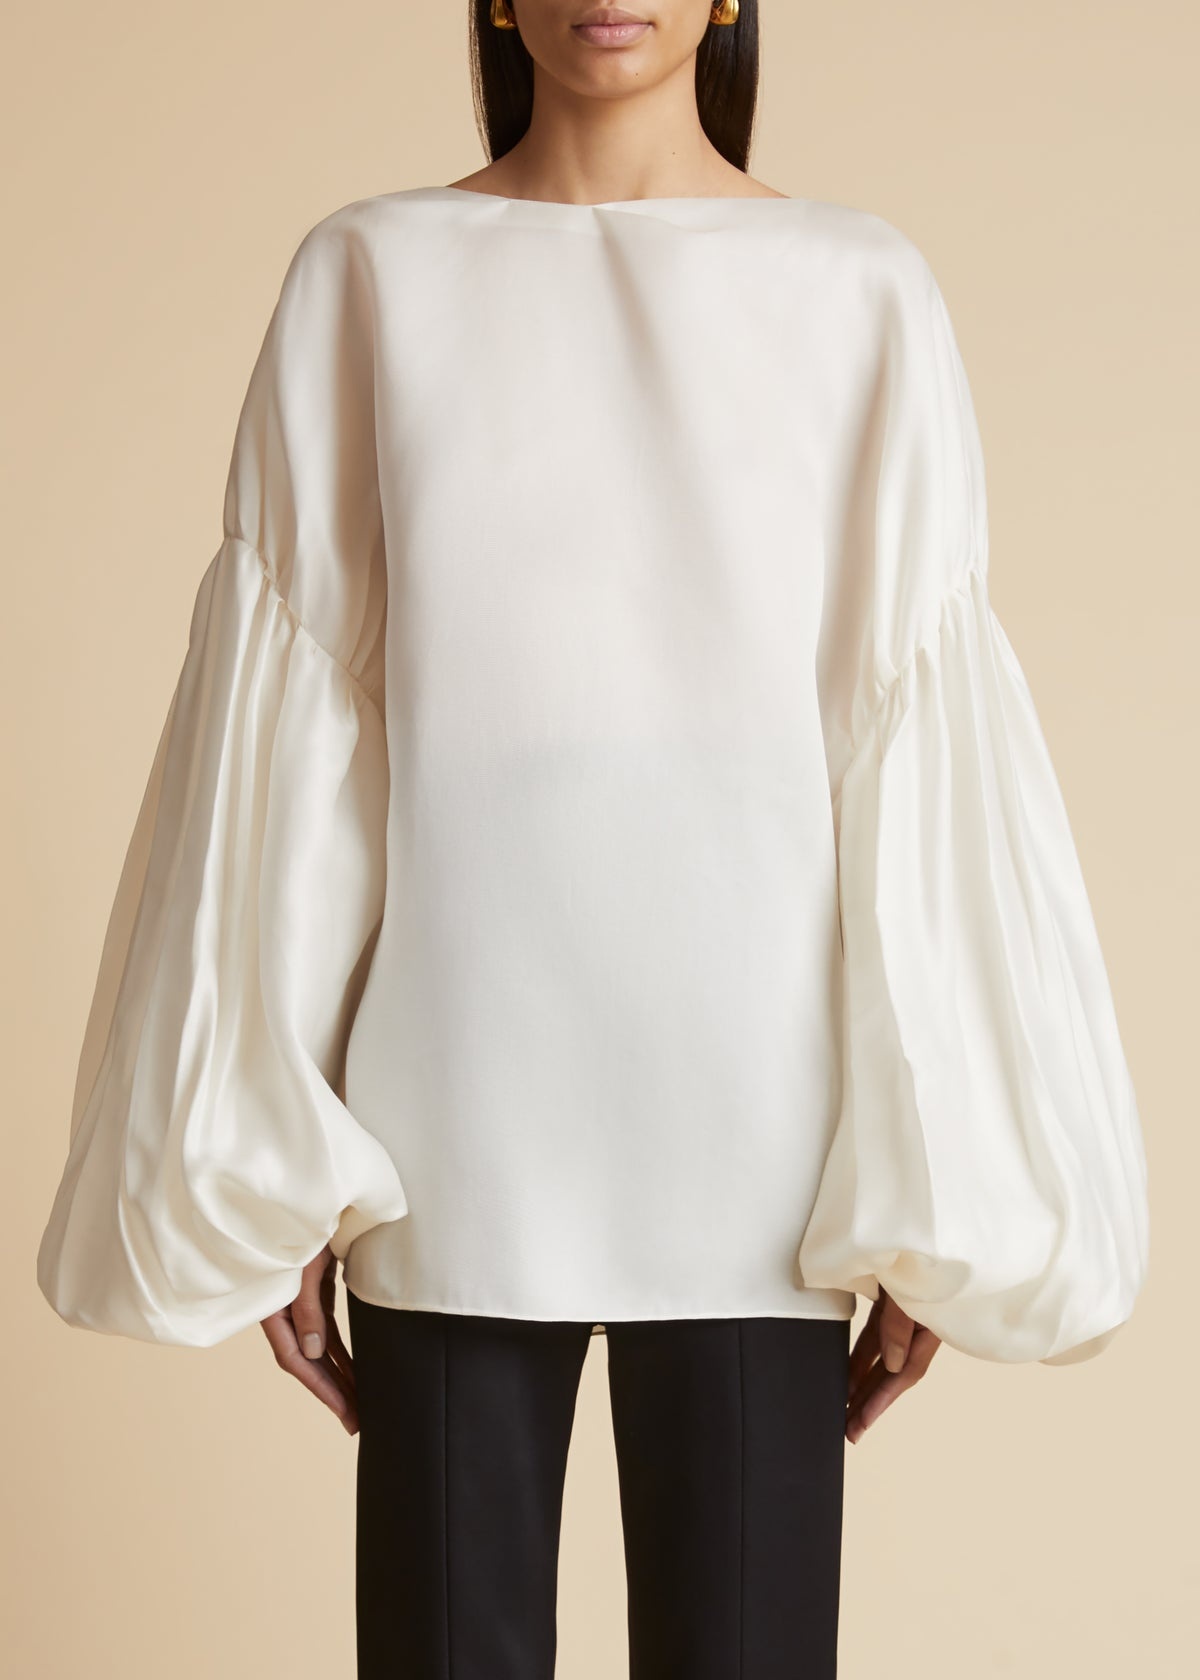 The Quico Top in Chalk - 2